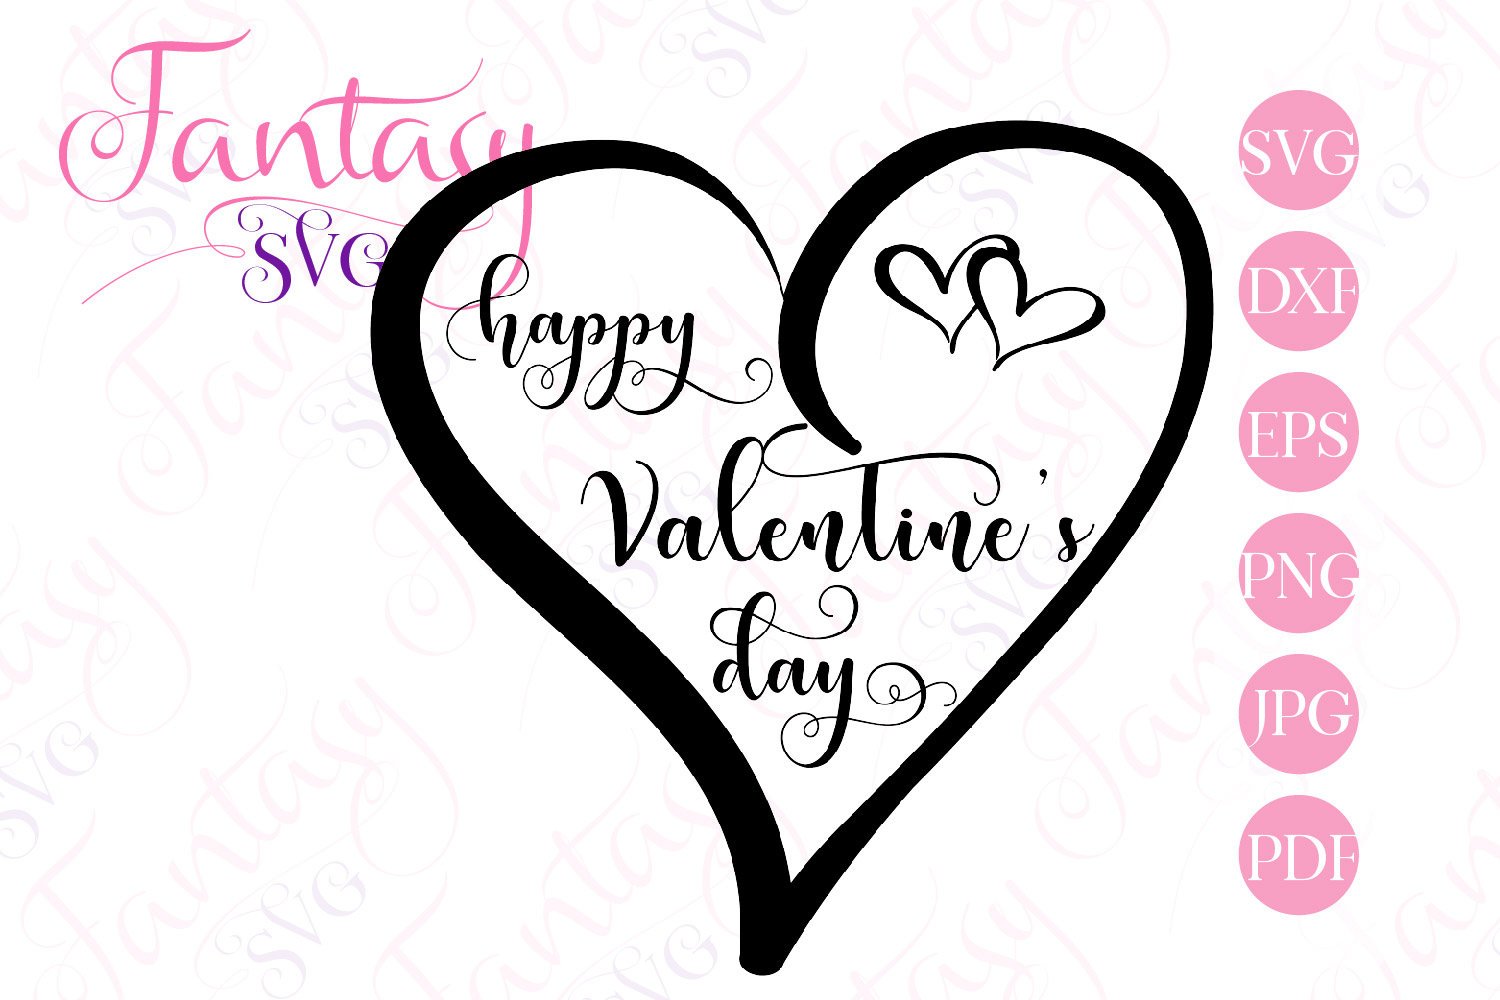 Happy Valentines day svg cut file for silhouette and cricut